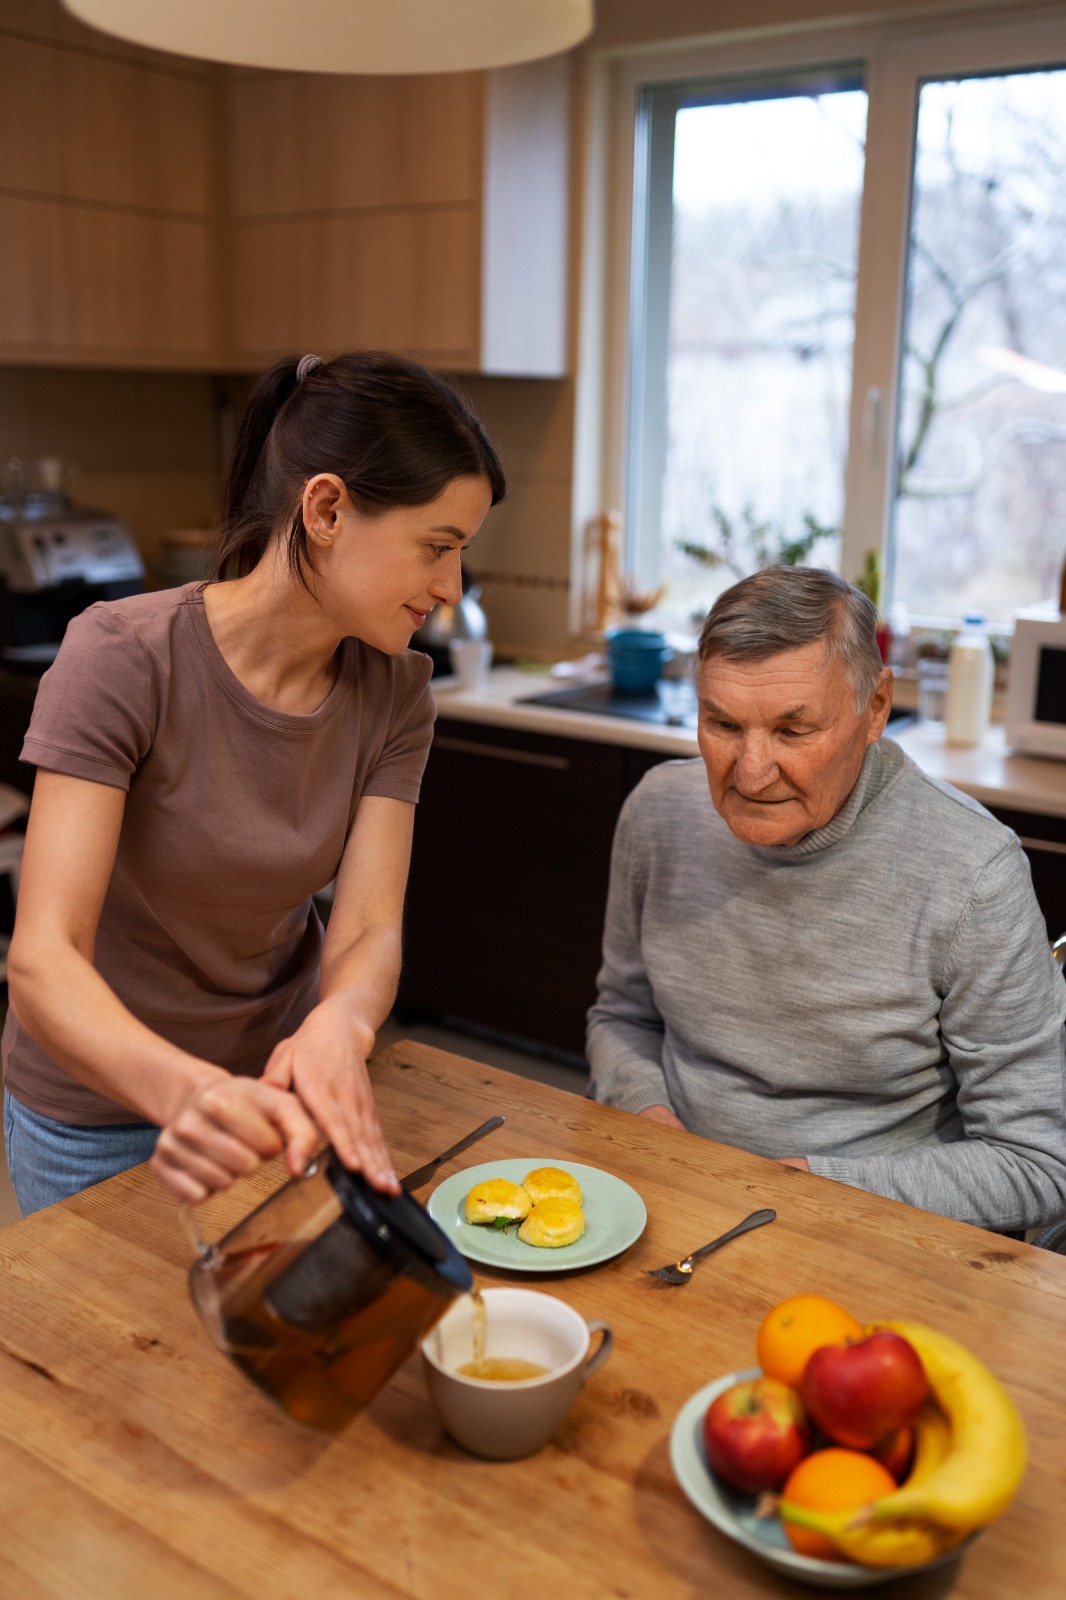 A woman serving food for a pensioner with a loving smile and looking his face